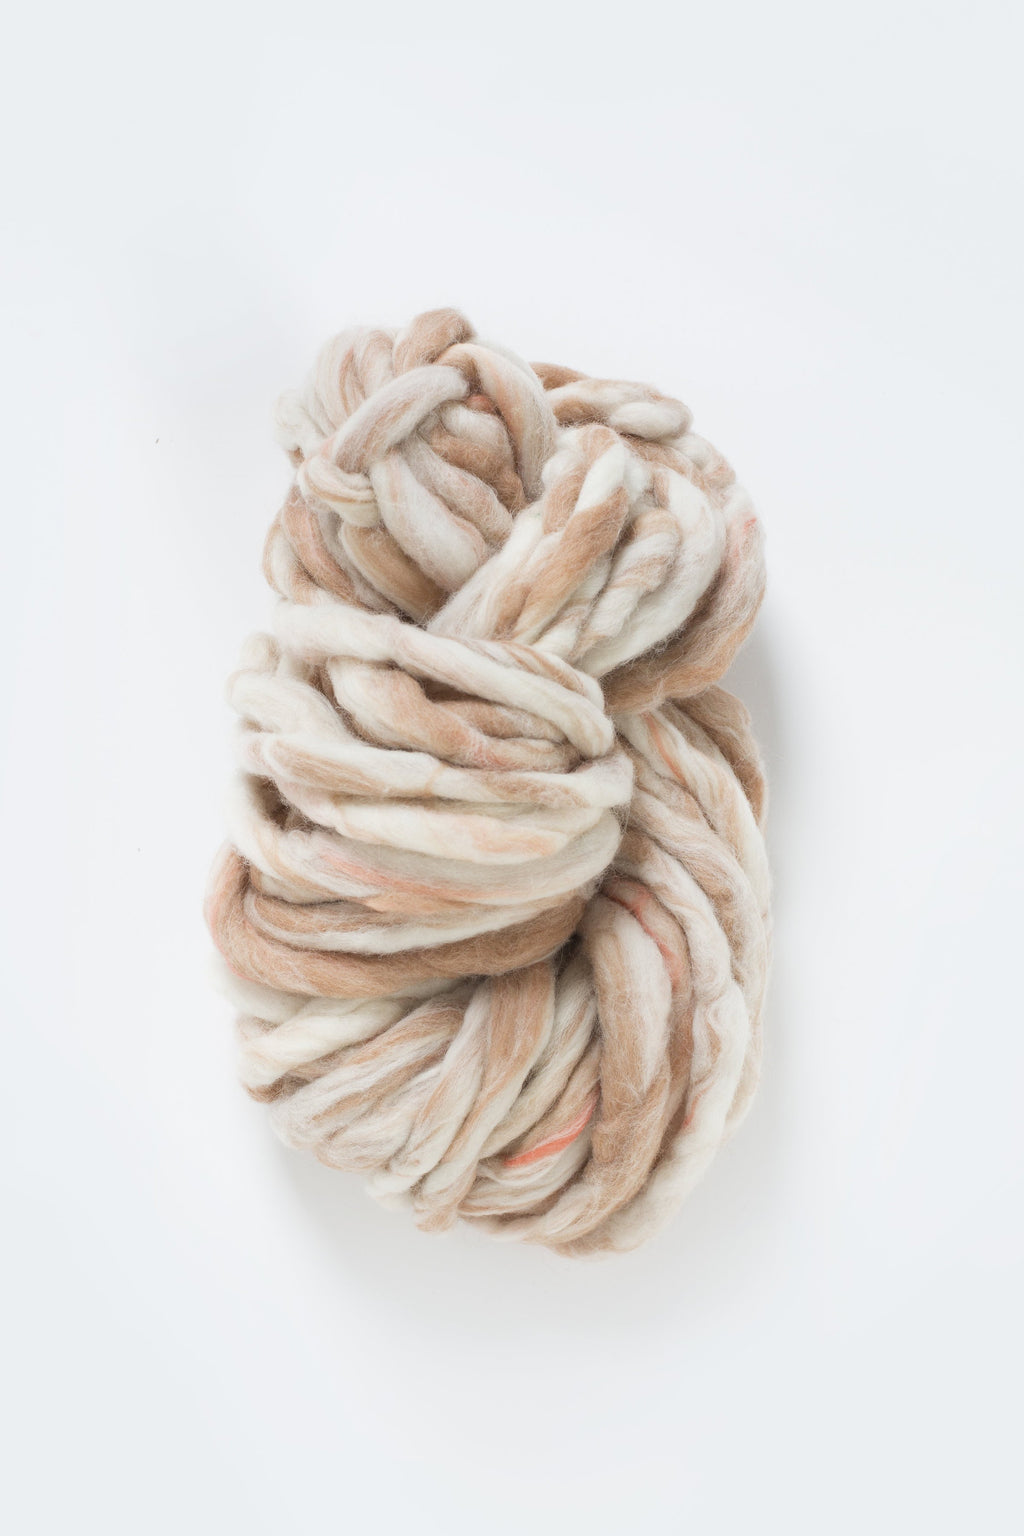 Wanderlust in Sand Dune - super bulky and chunky handspun yarn by knit collage